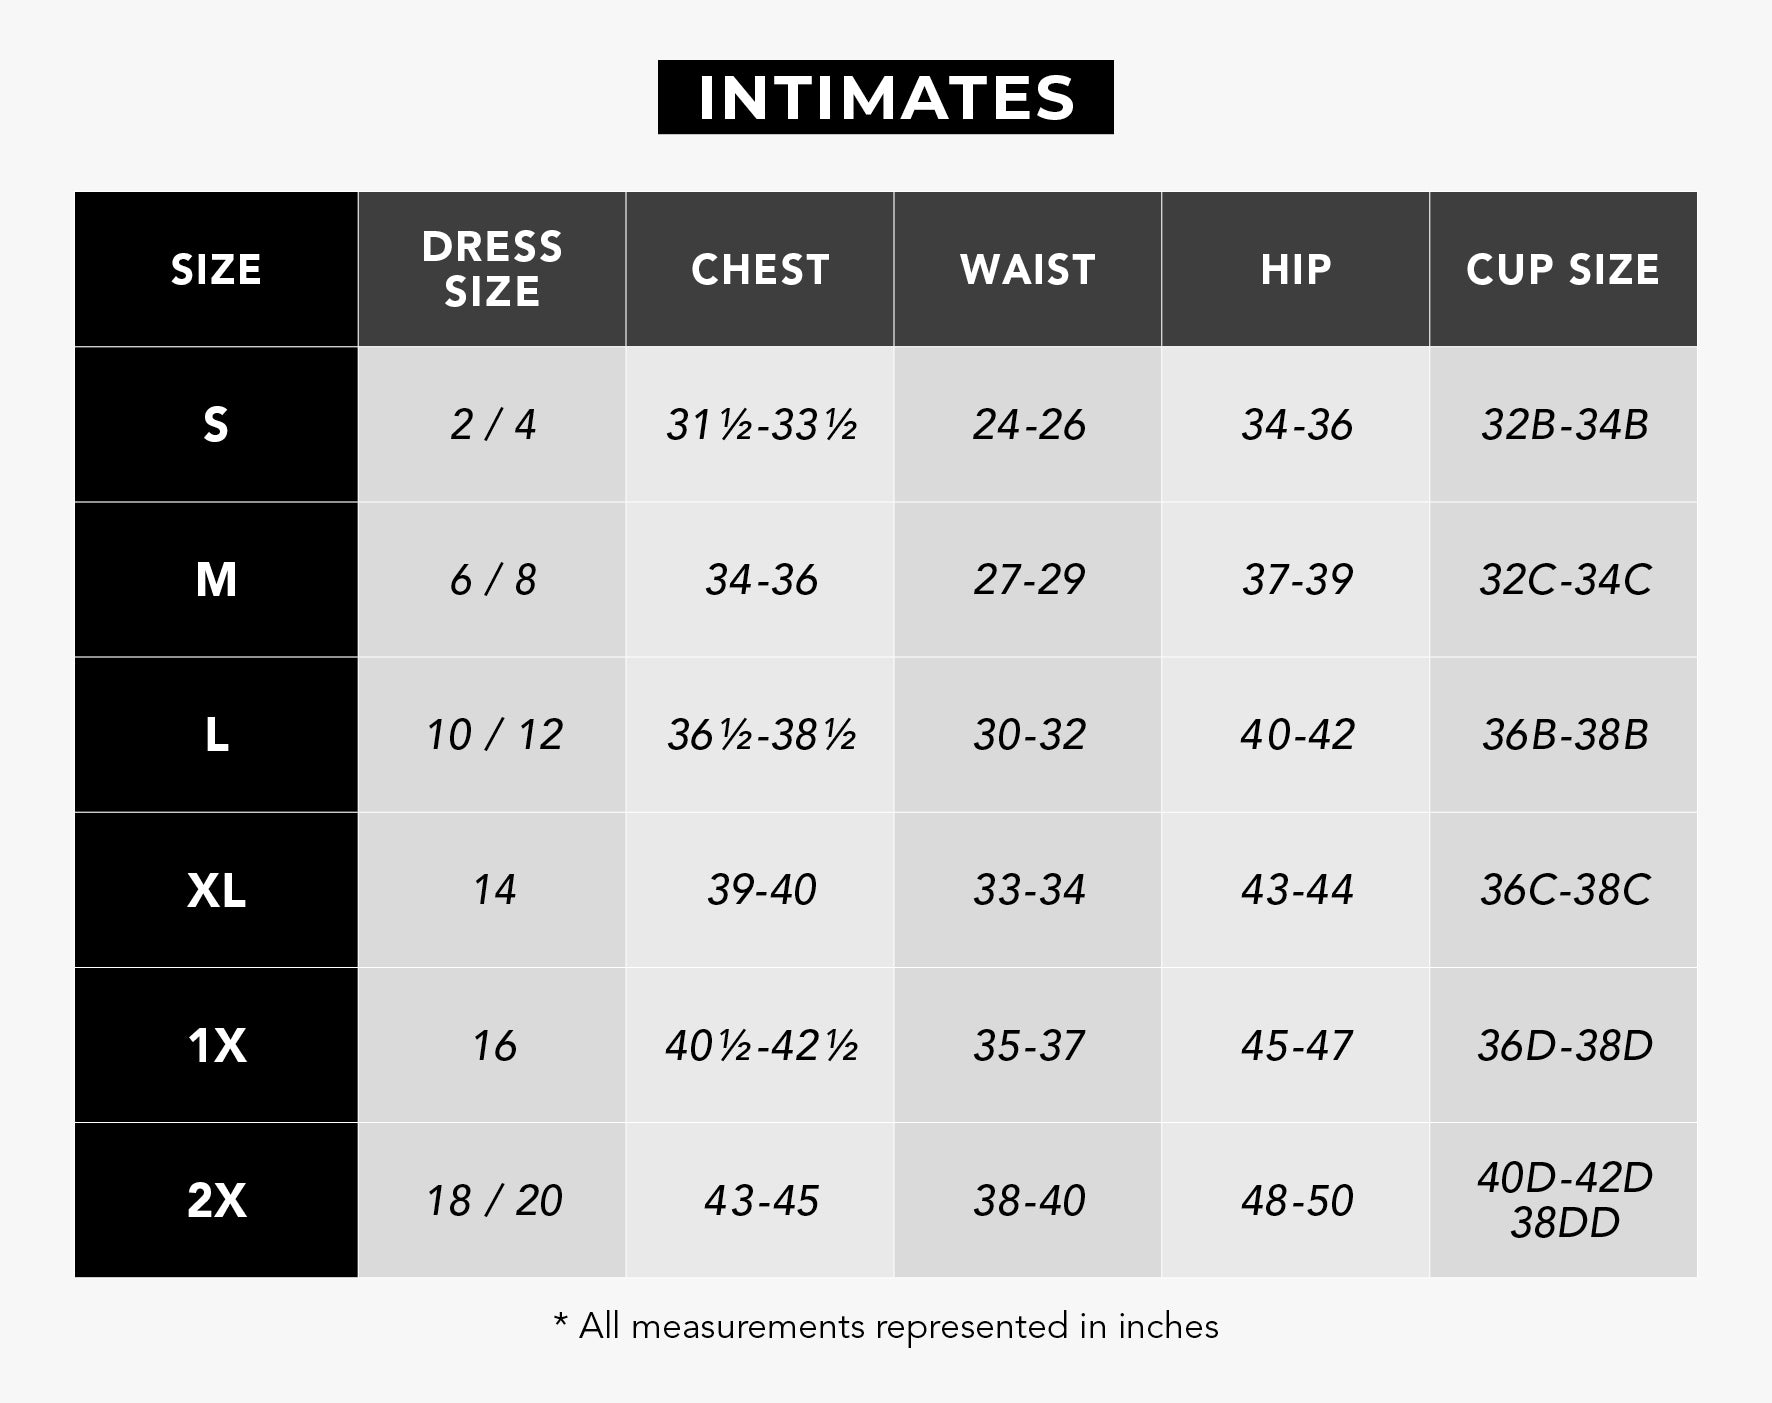 Urban Planet - Women's Intimates Size Guide